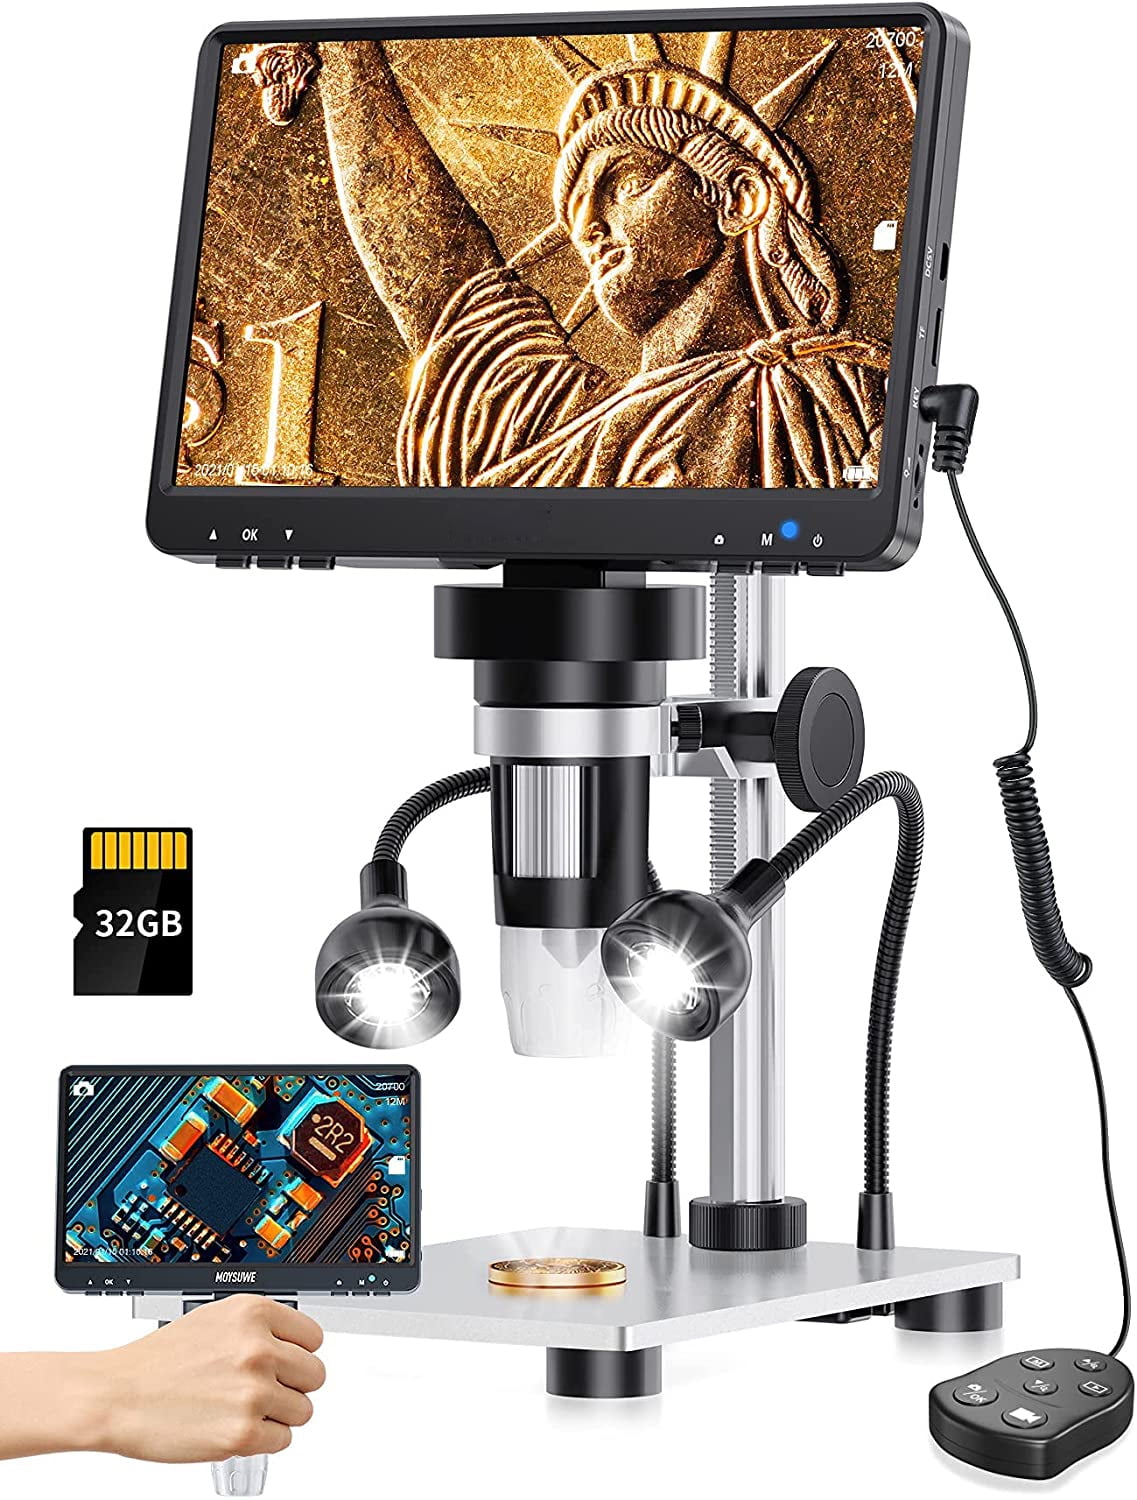 Elikliv 7 Digital Microscope, 1200X Coin Microscope 1080P with 12MP Camera  Sensor, Wired Remote, 10 LED Lights, Soldering Electronic Microscope for